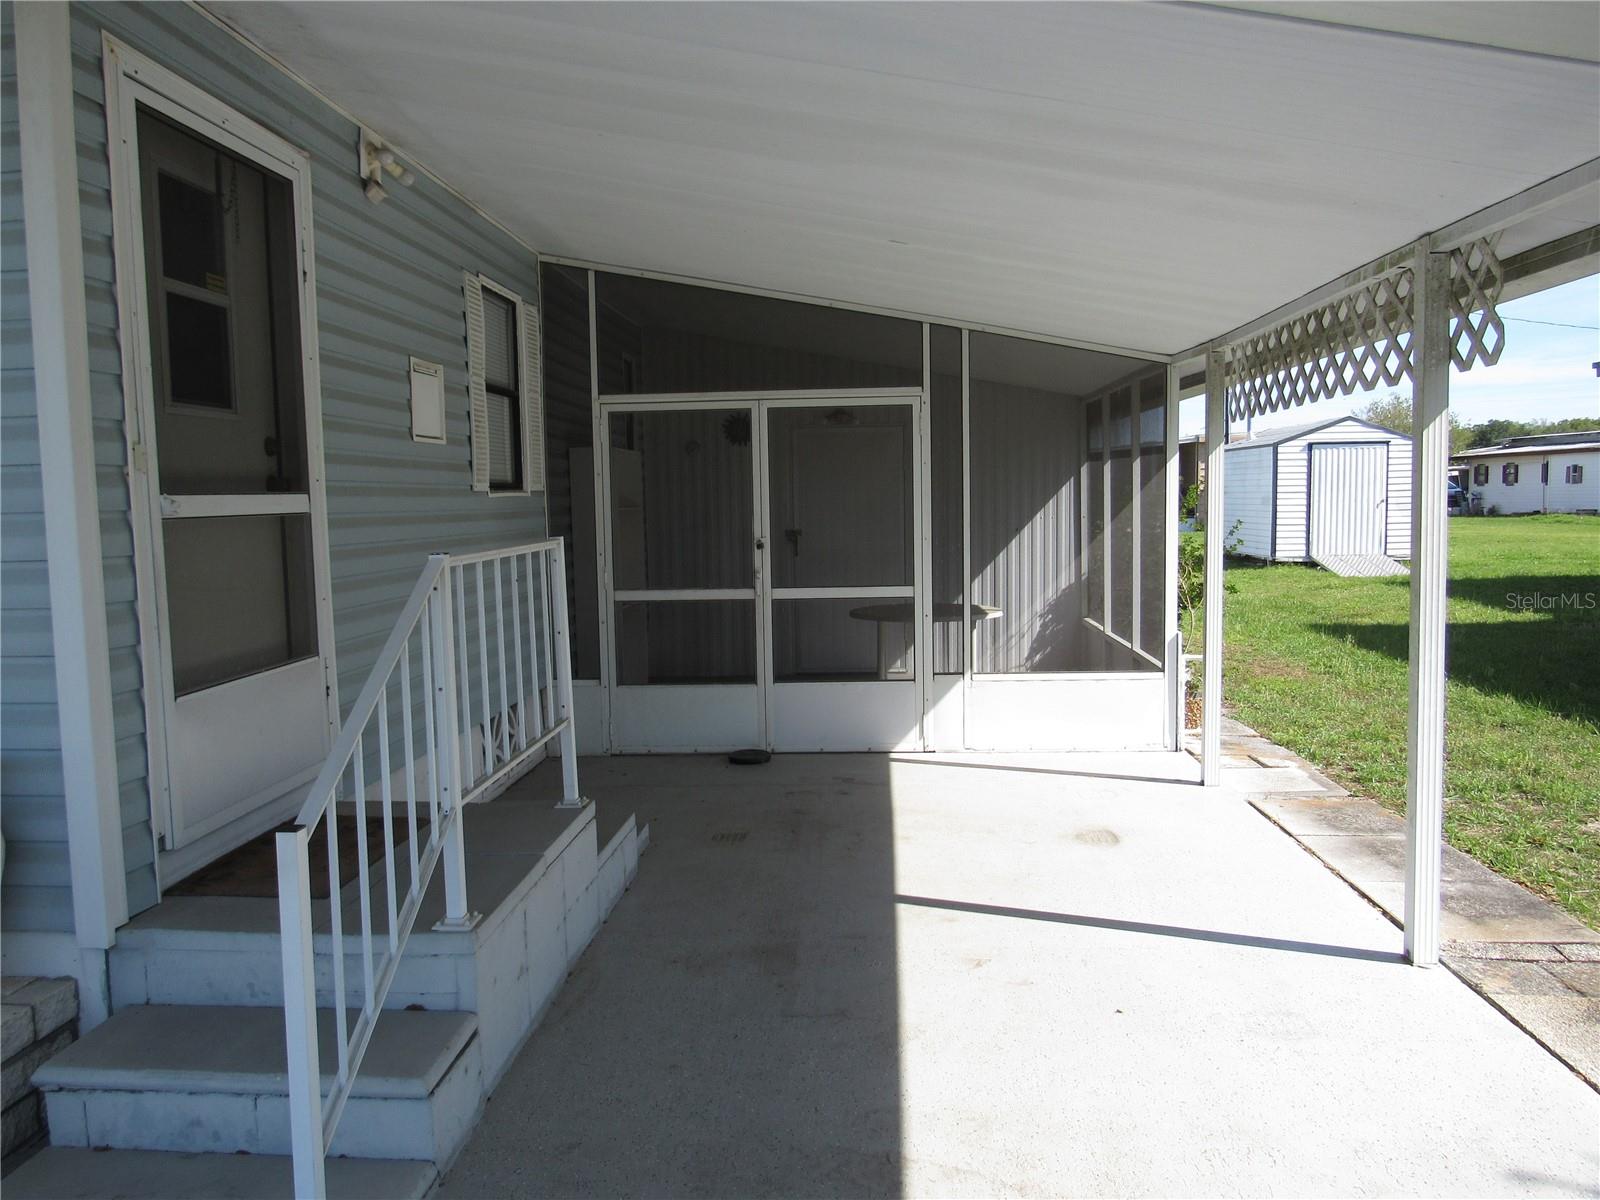 Main entry & attached screen porch.